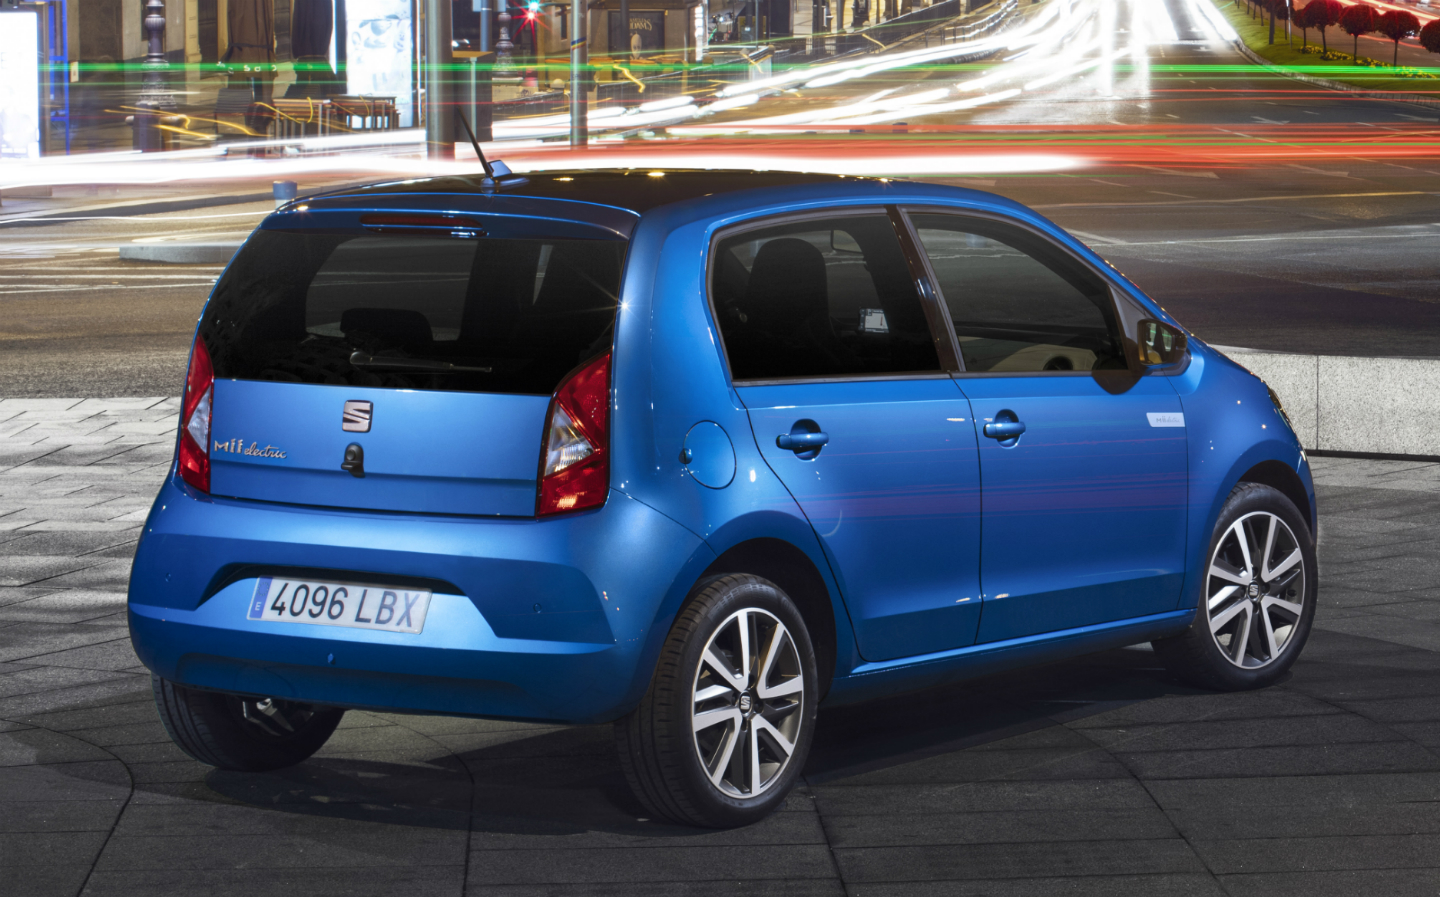 SEAT Mii Electric Performance and Speed